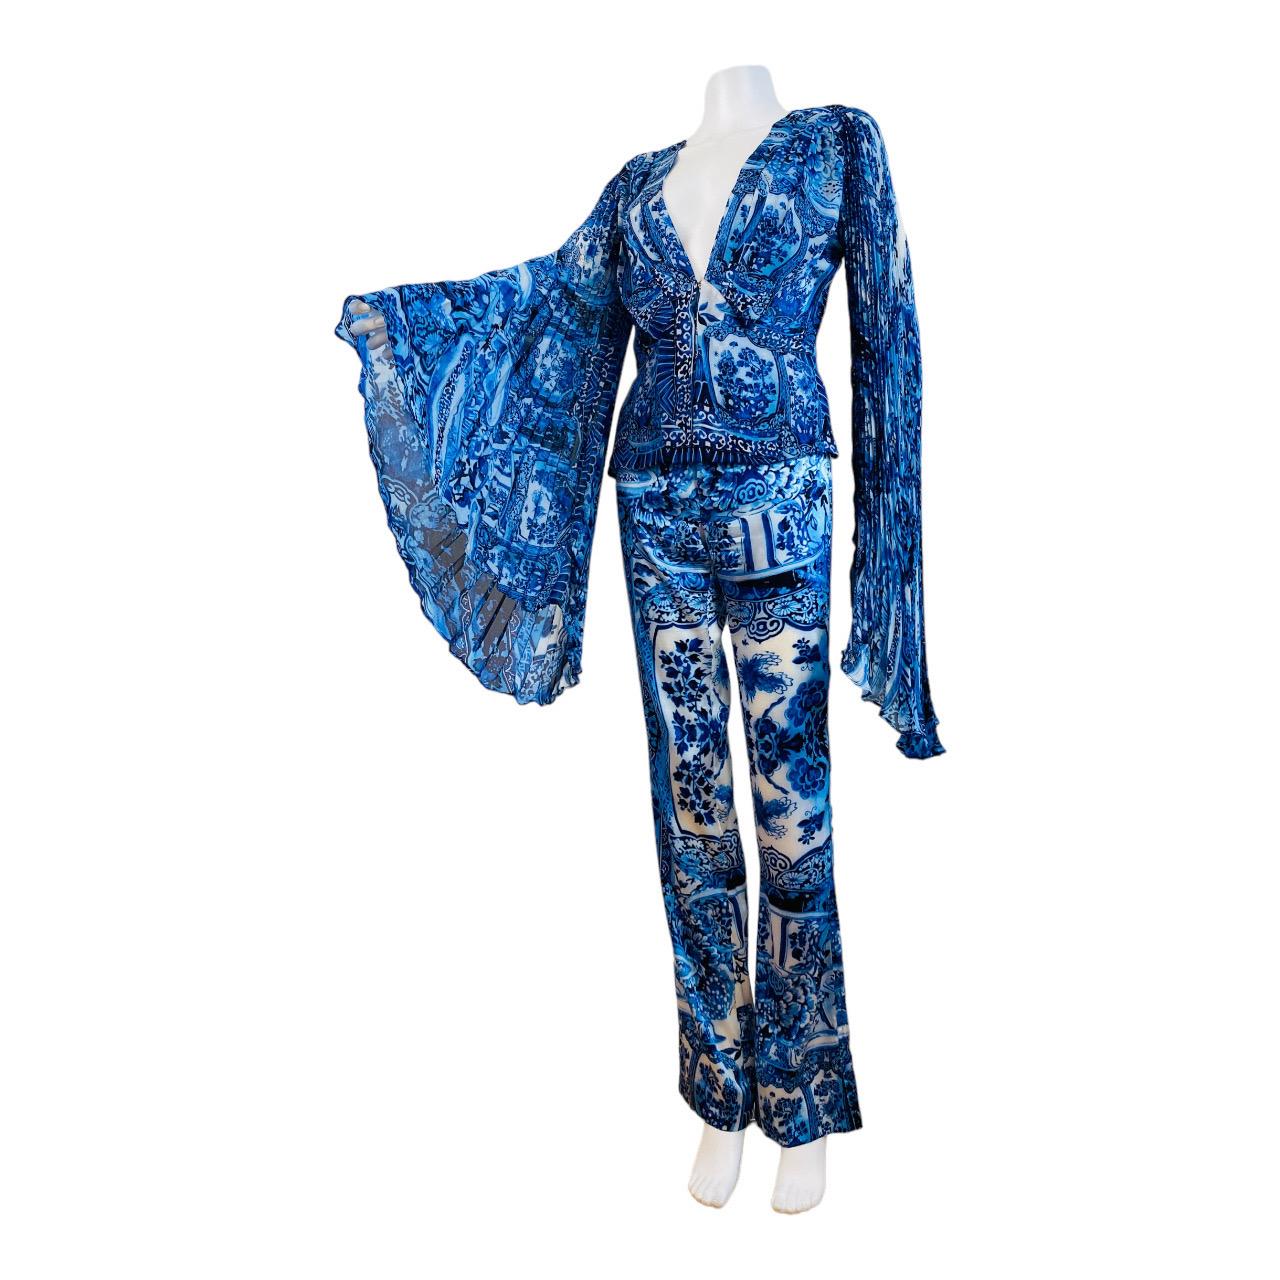 Vintage F/W 2005 Roberto Cavalli Set
Iconic chinoiserie blue + white print 
One pair of low cut straight leg cut stretch silk pants with belt loops, dark metal closure button + accents, side hidden pocket on both hips still sewn closed (shown pinned